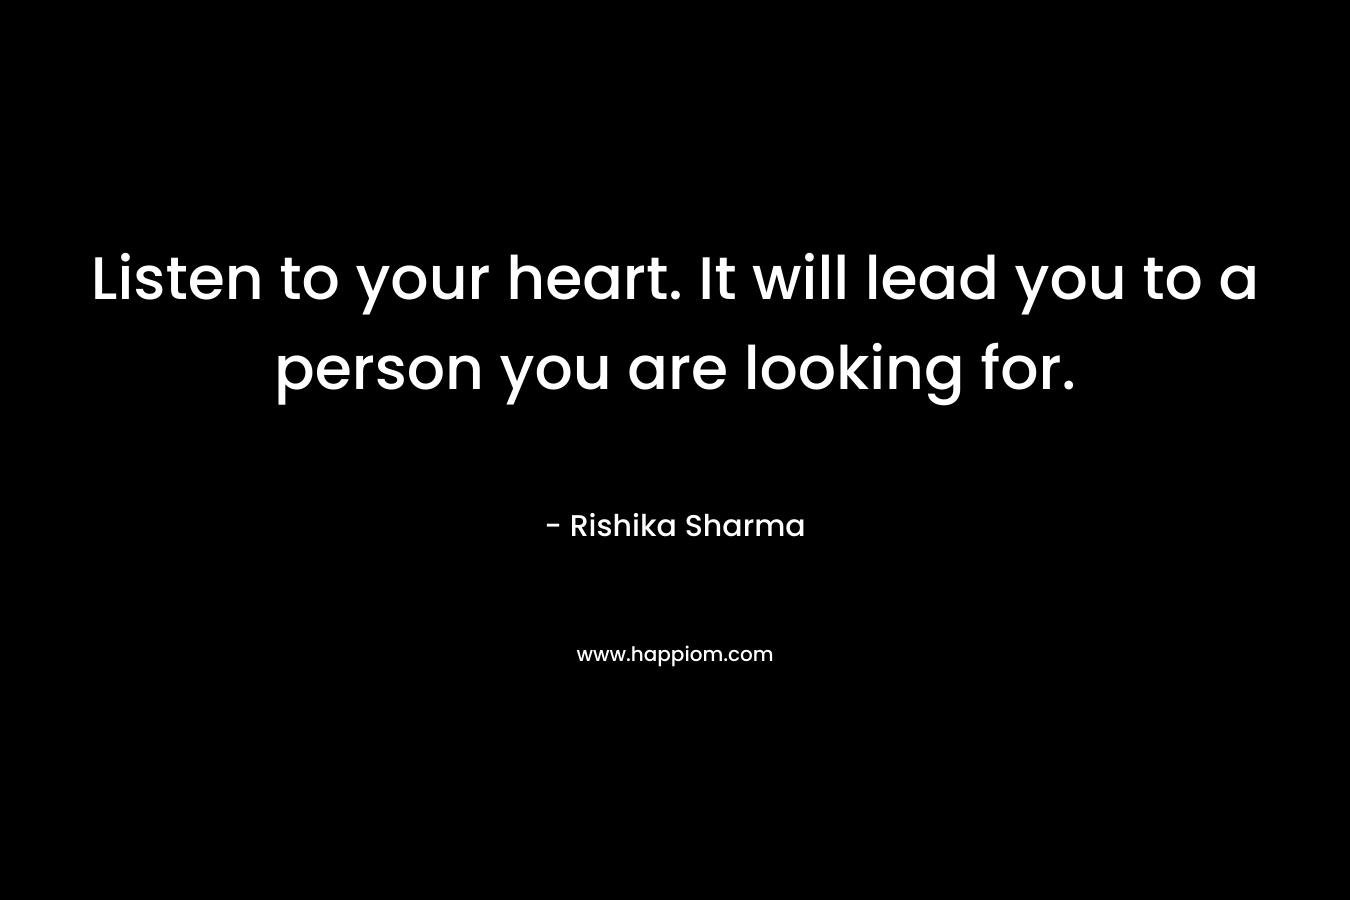 Listen to your heart. It will lead you to a person you are looking for. – Rishika Sharma